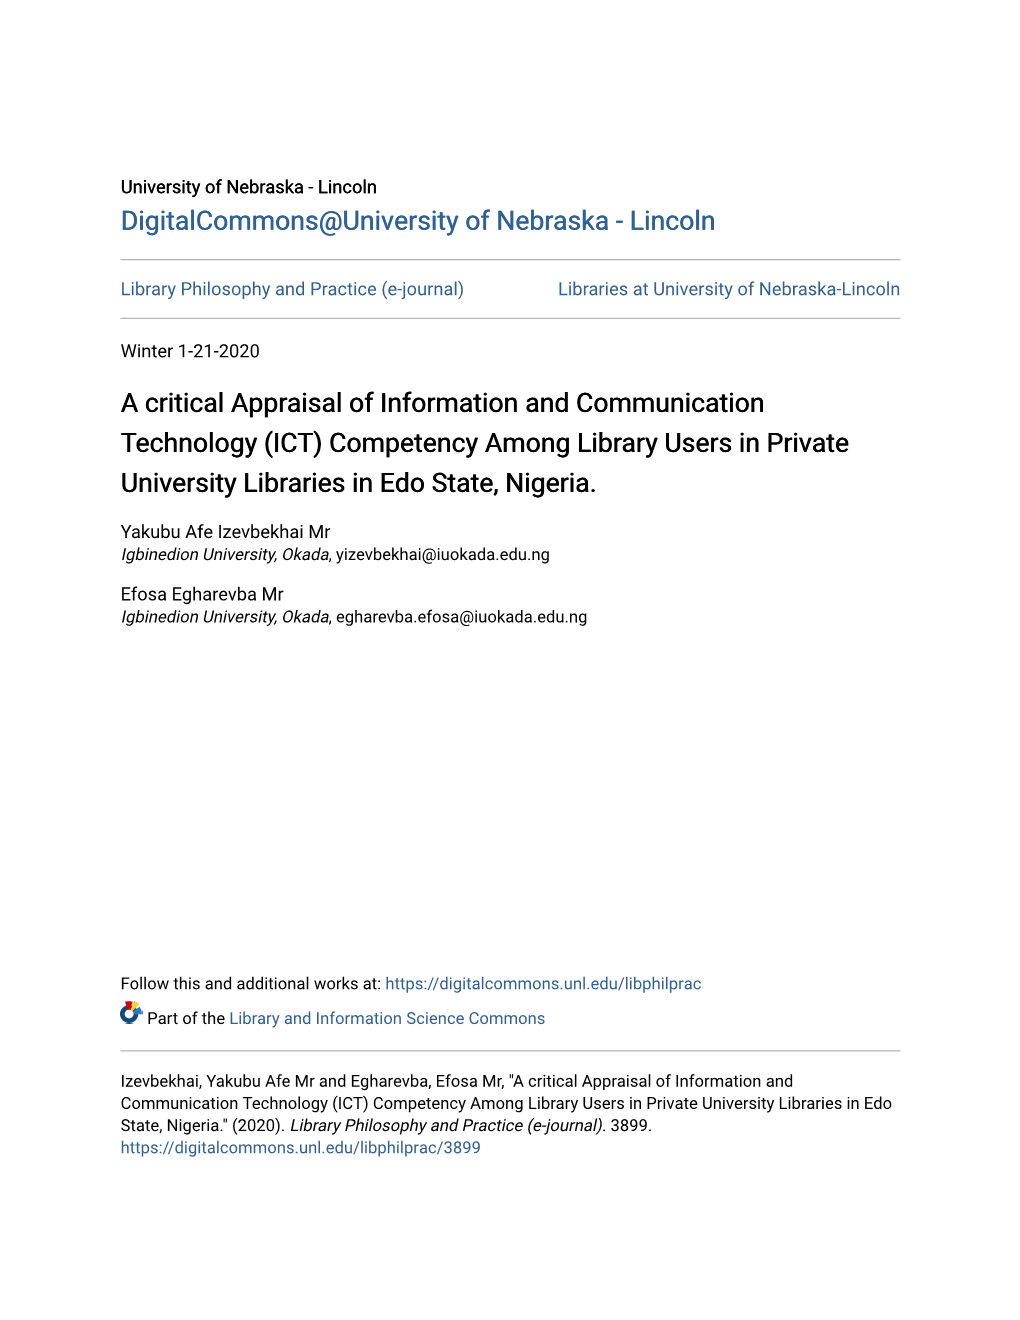 (ICT) Competency Among Library Users in Private University Libraries in Edo State, Nigeria